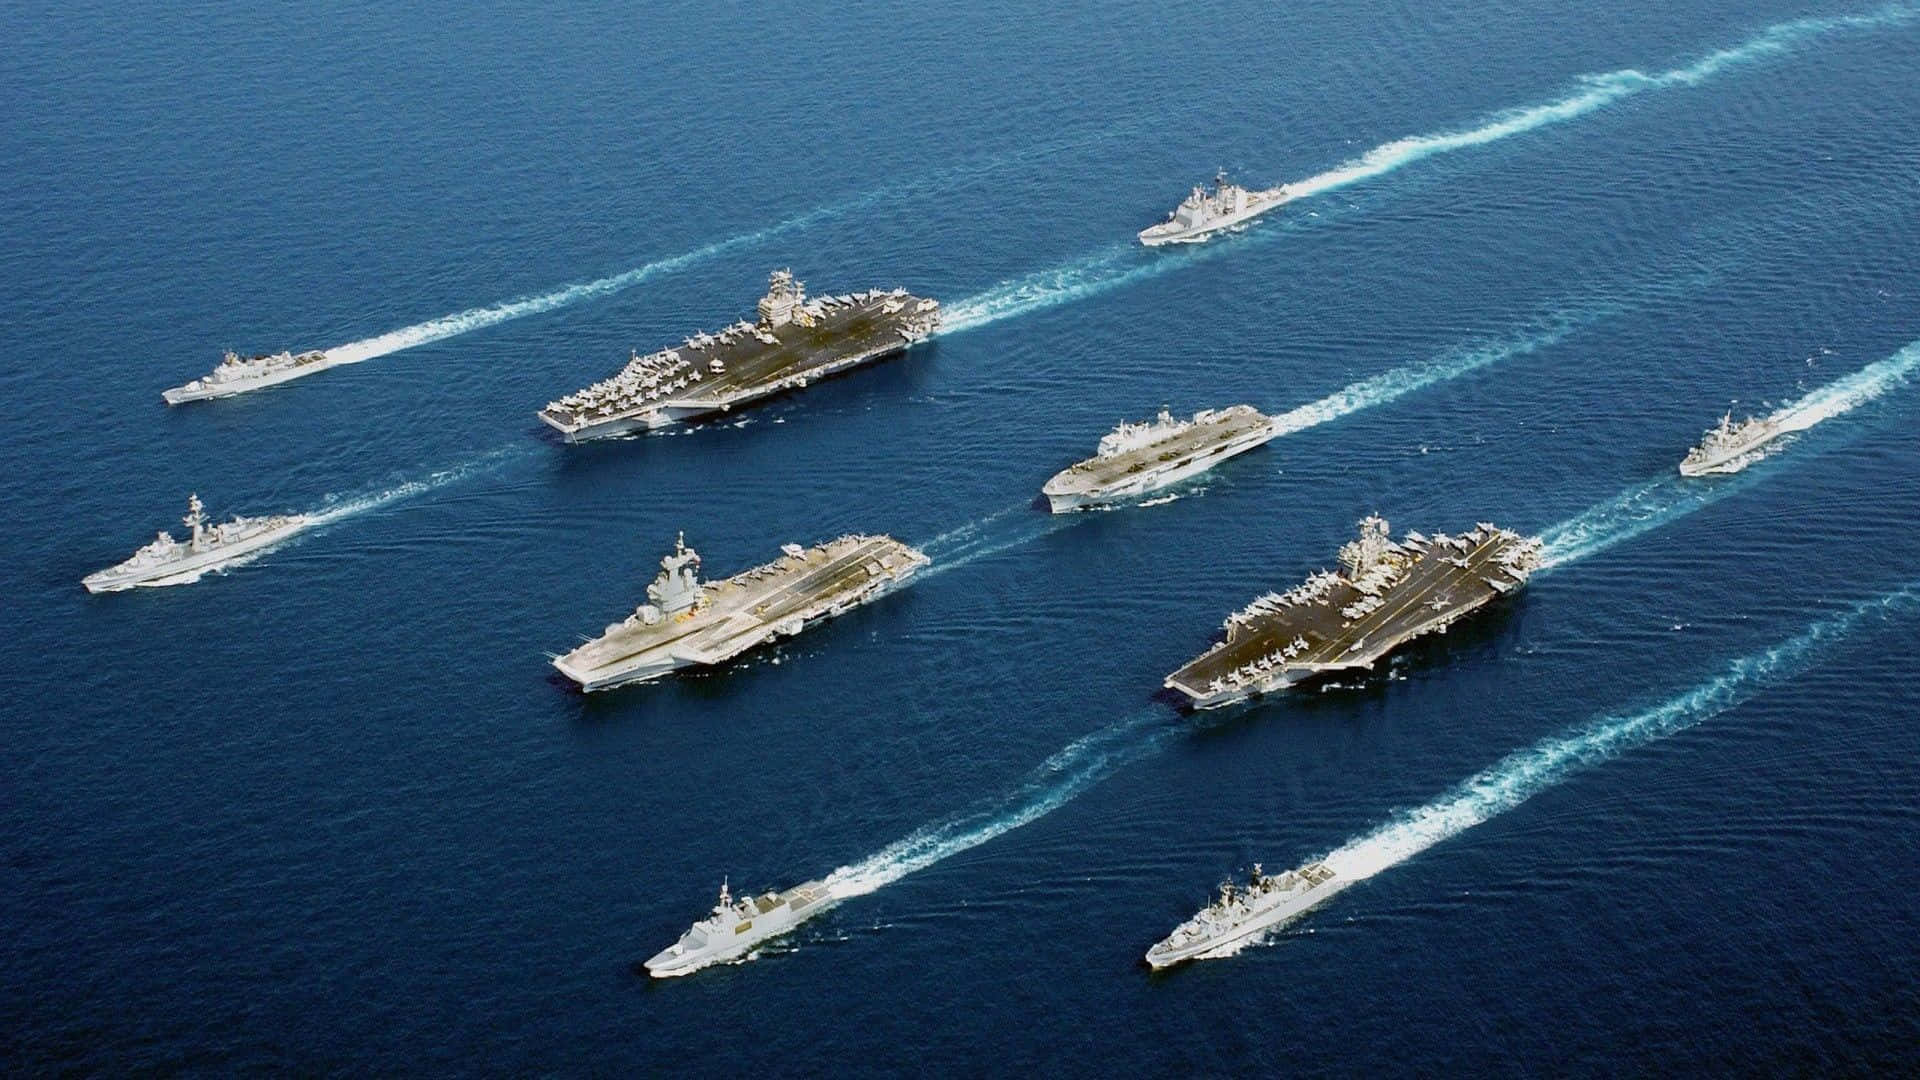 An iconic view of the warships of the United States Navy